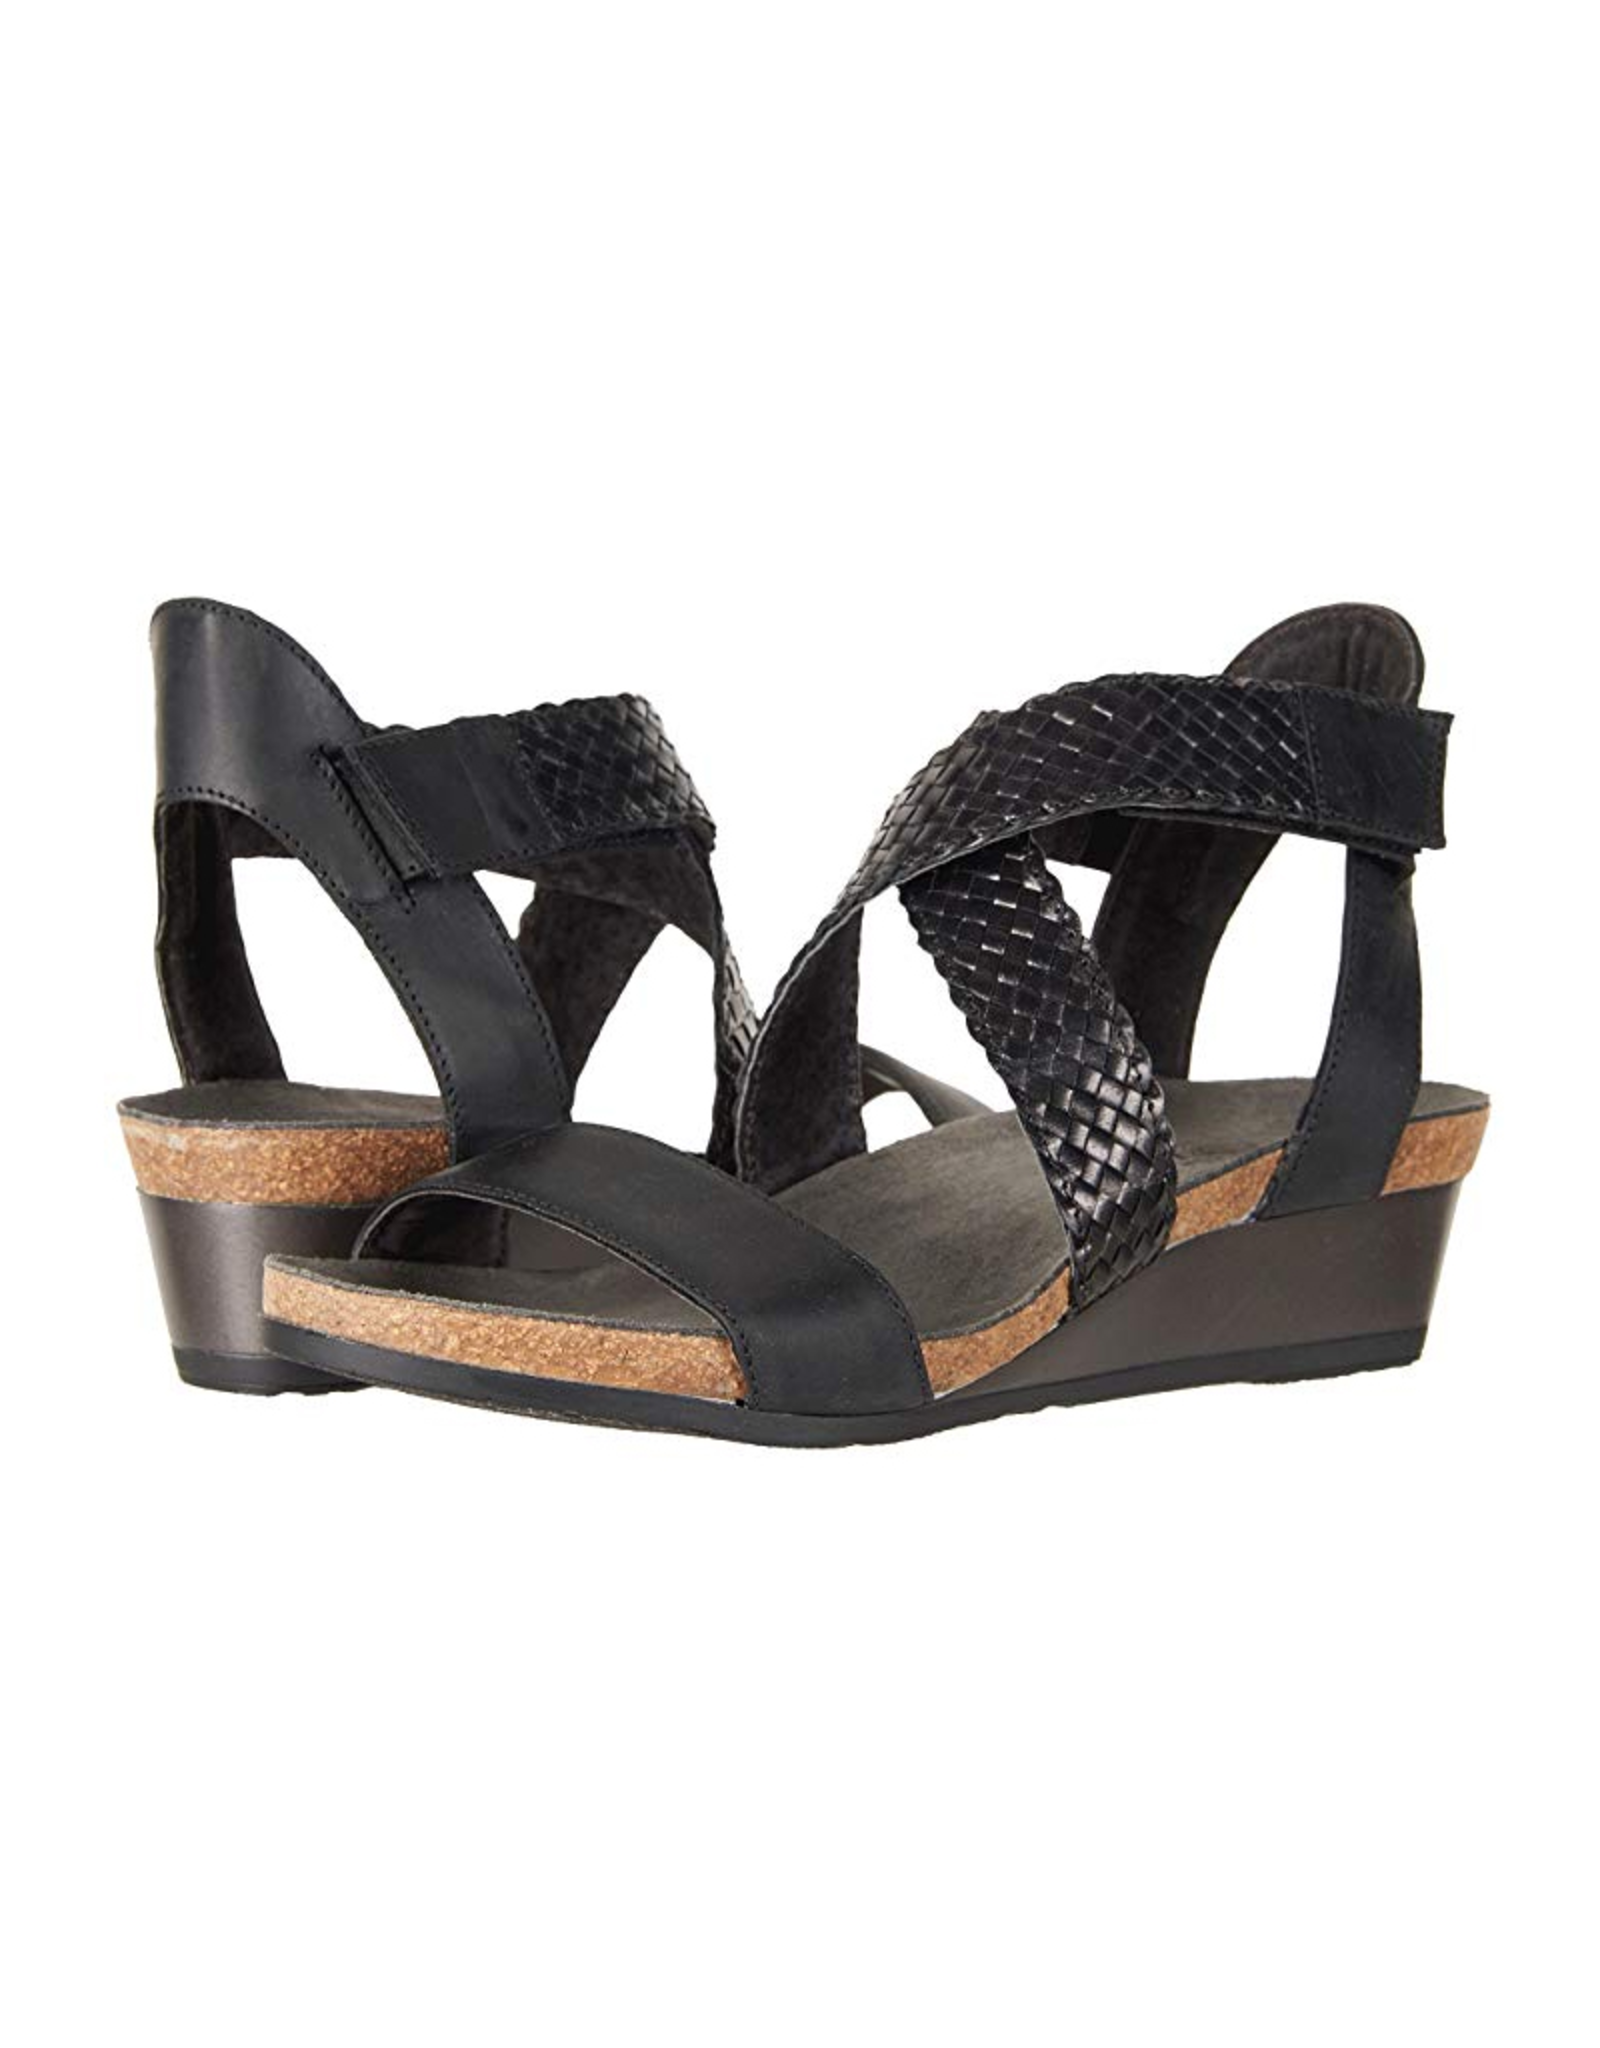 Naot Cupid Strappy Wedge - Maria Luisa 